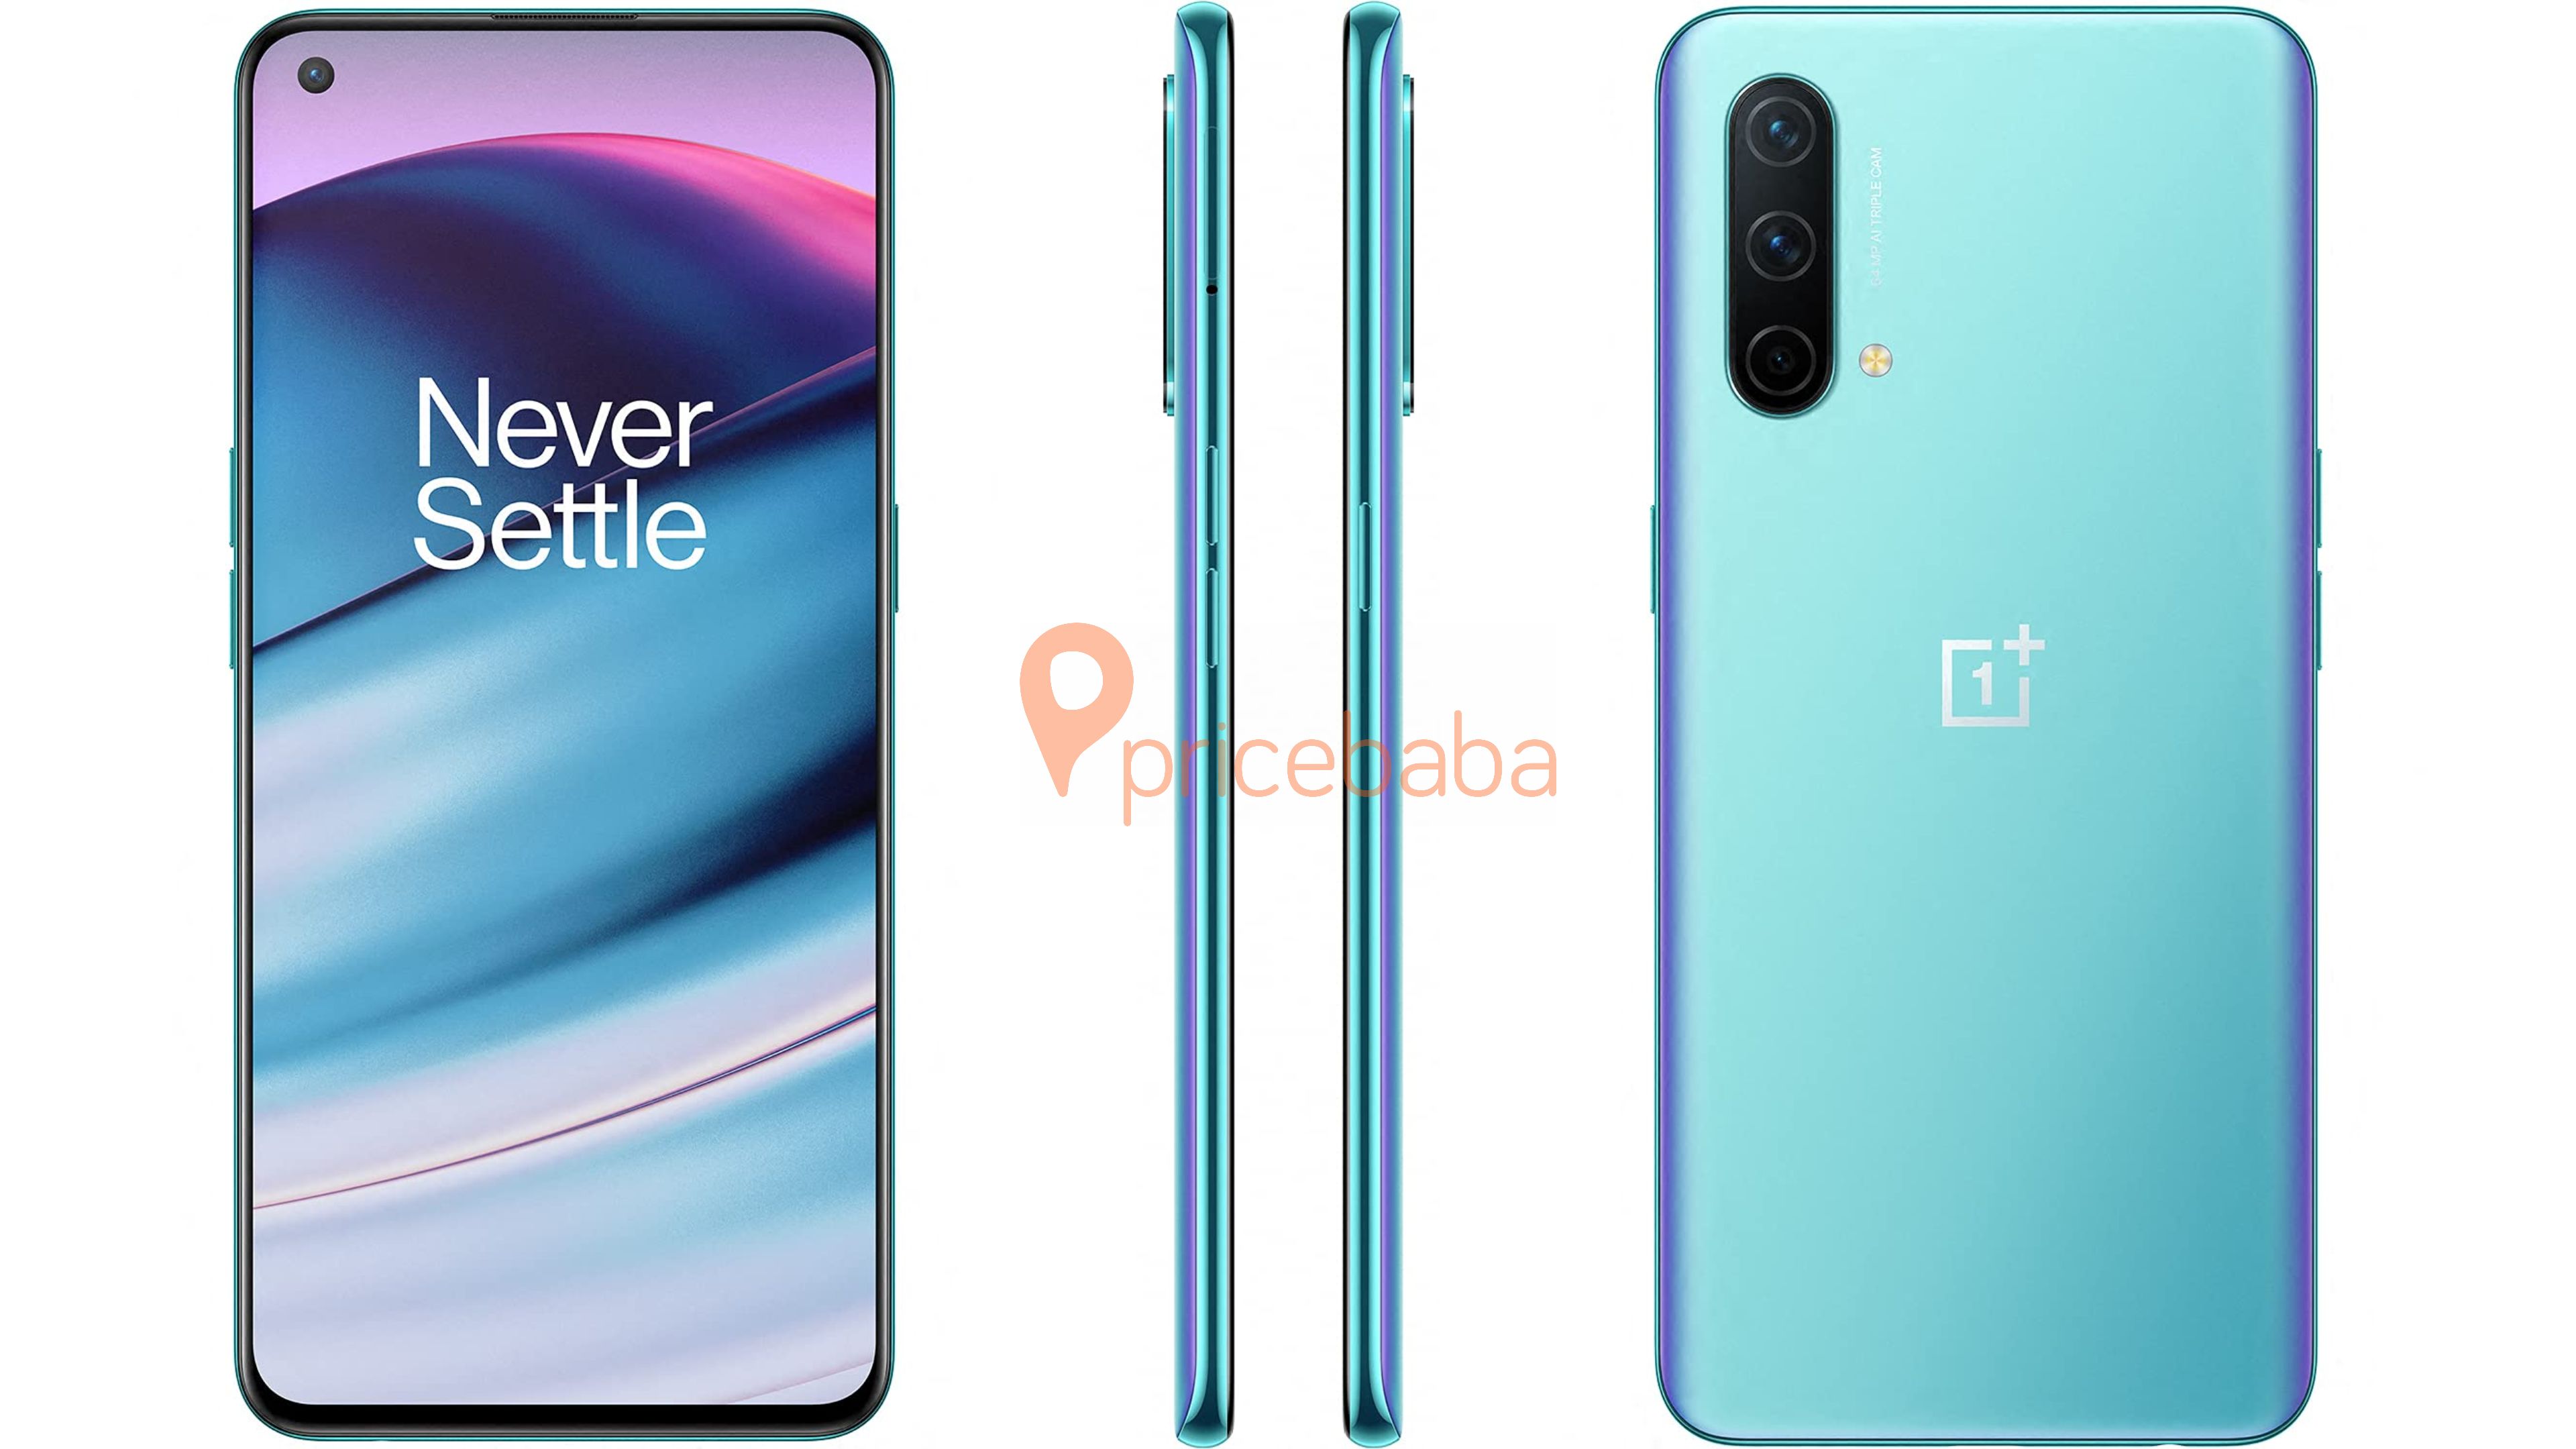 Oneplus Nord Ce 5g New Renders Promo Video Configurations Leaked Before Launch Gizmochina